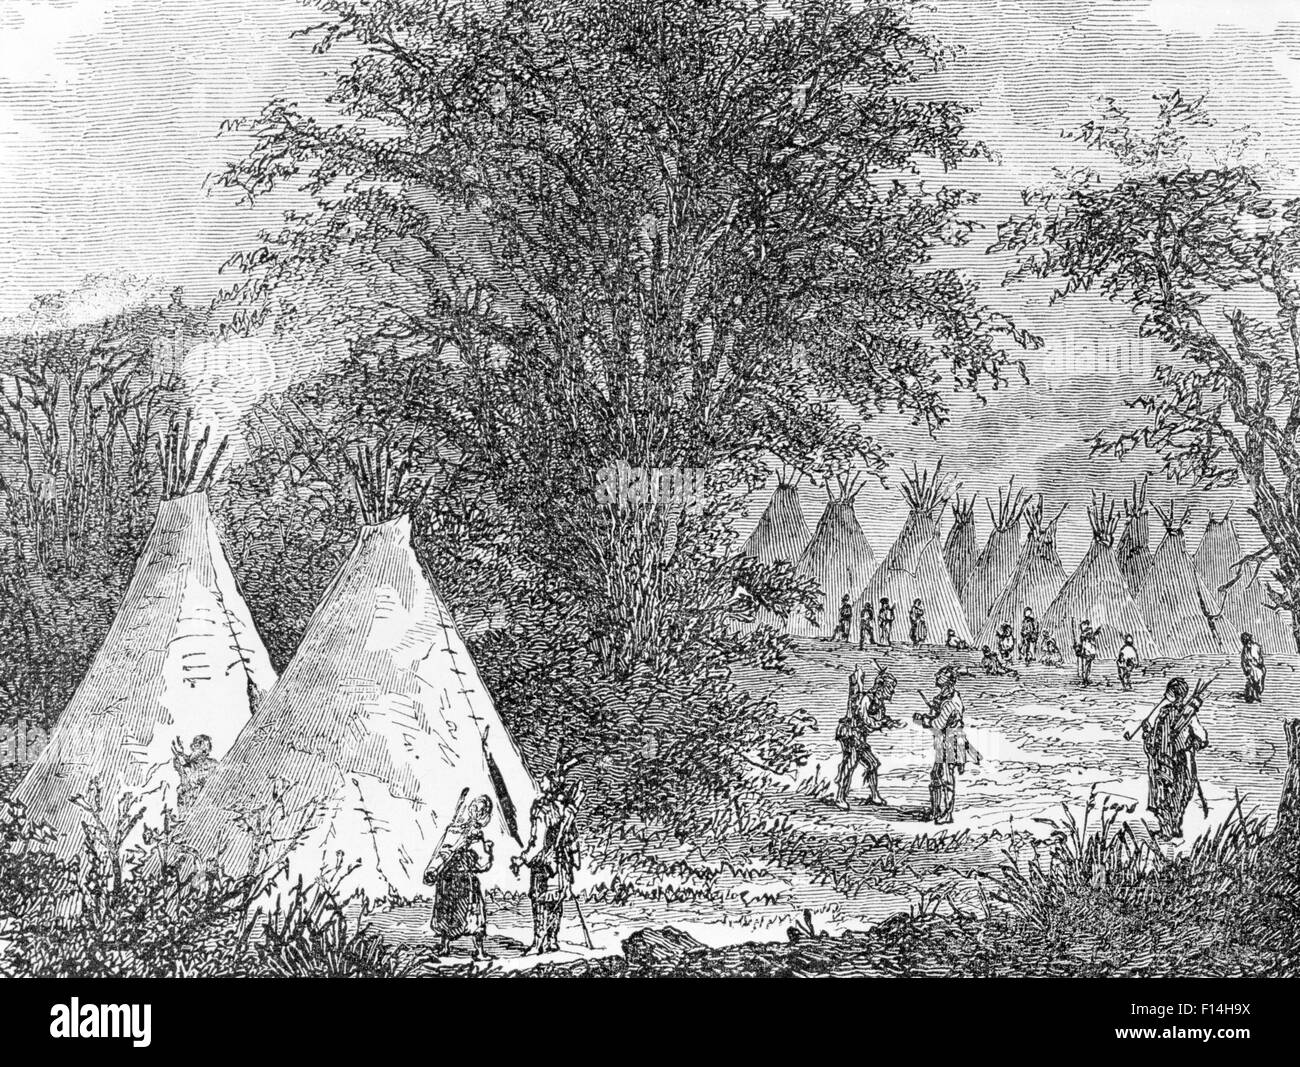 1800s 1870s 1880s TEPEES OF SIOUX INDIAN VILLAGE IN THE LATE 19TH CENTURY ENGRAVING Stock Photo